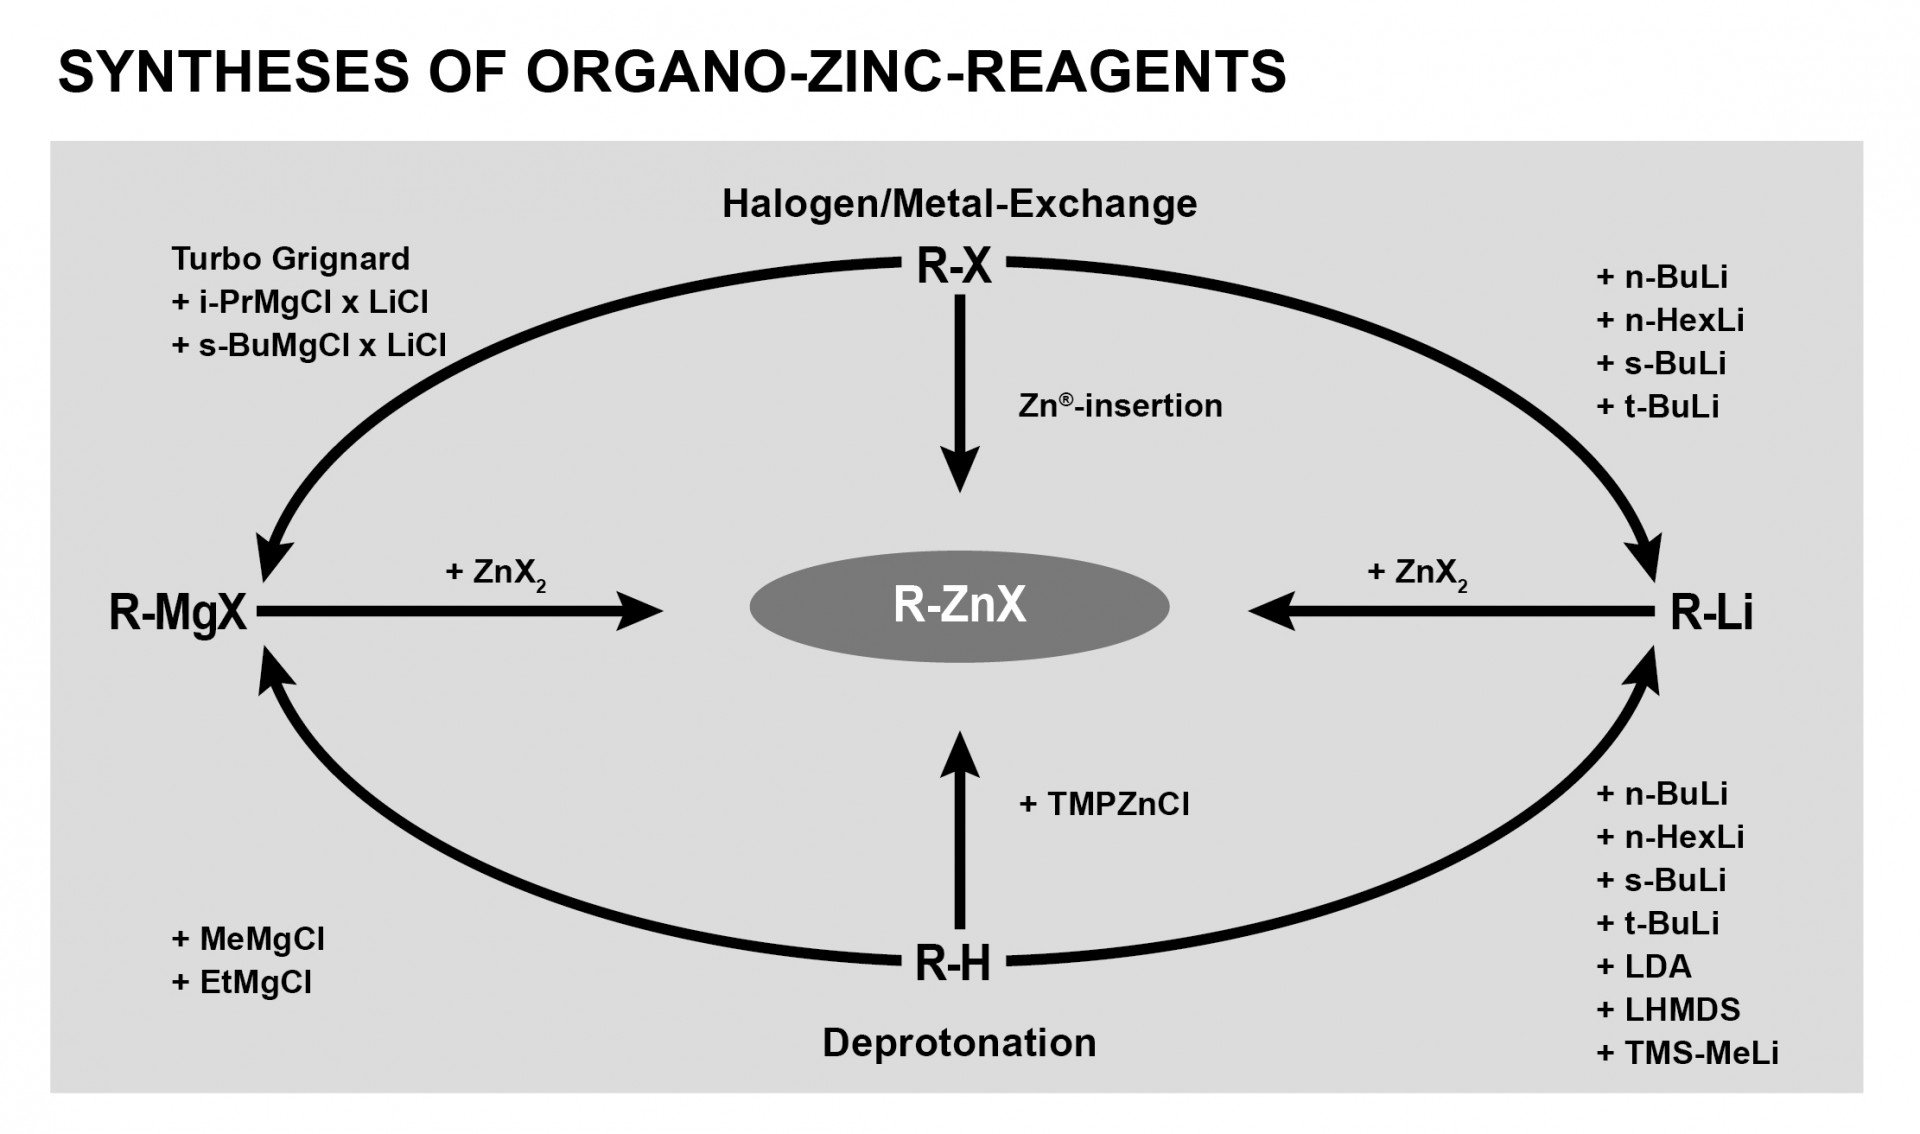 Synthese of Organo-Zinc-Reagents